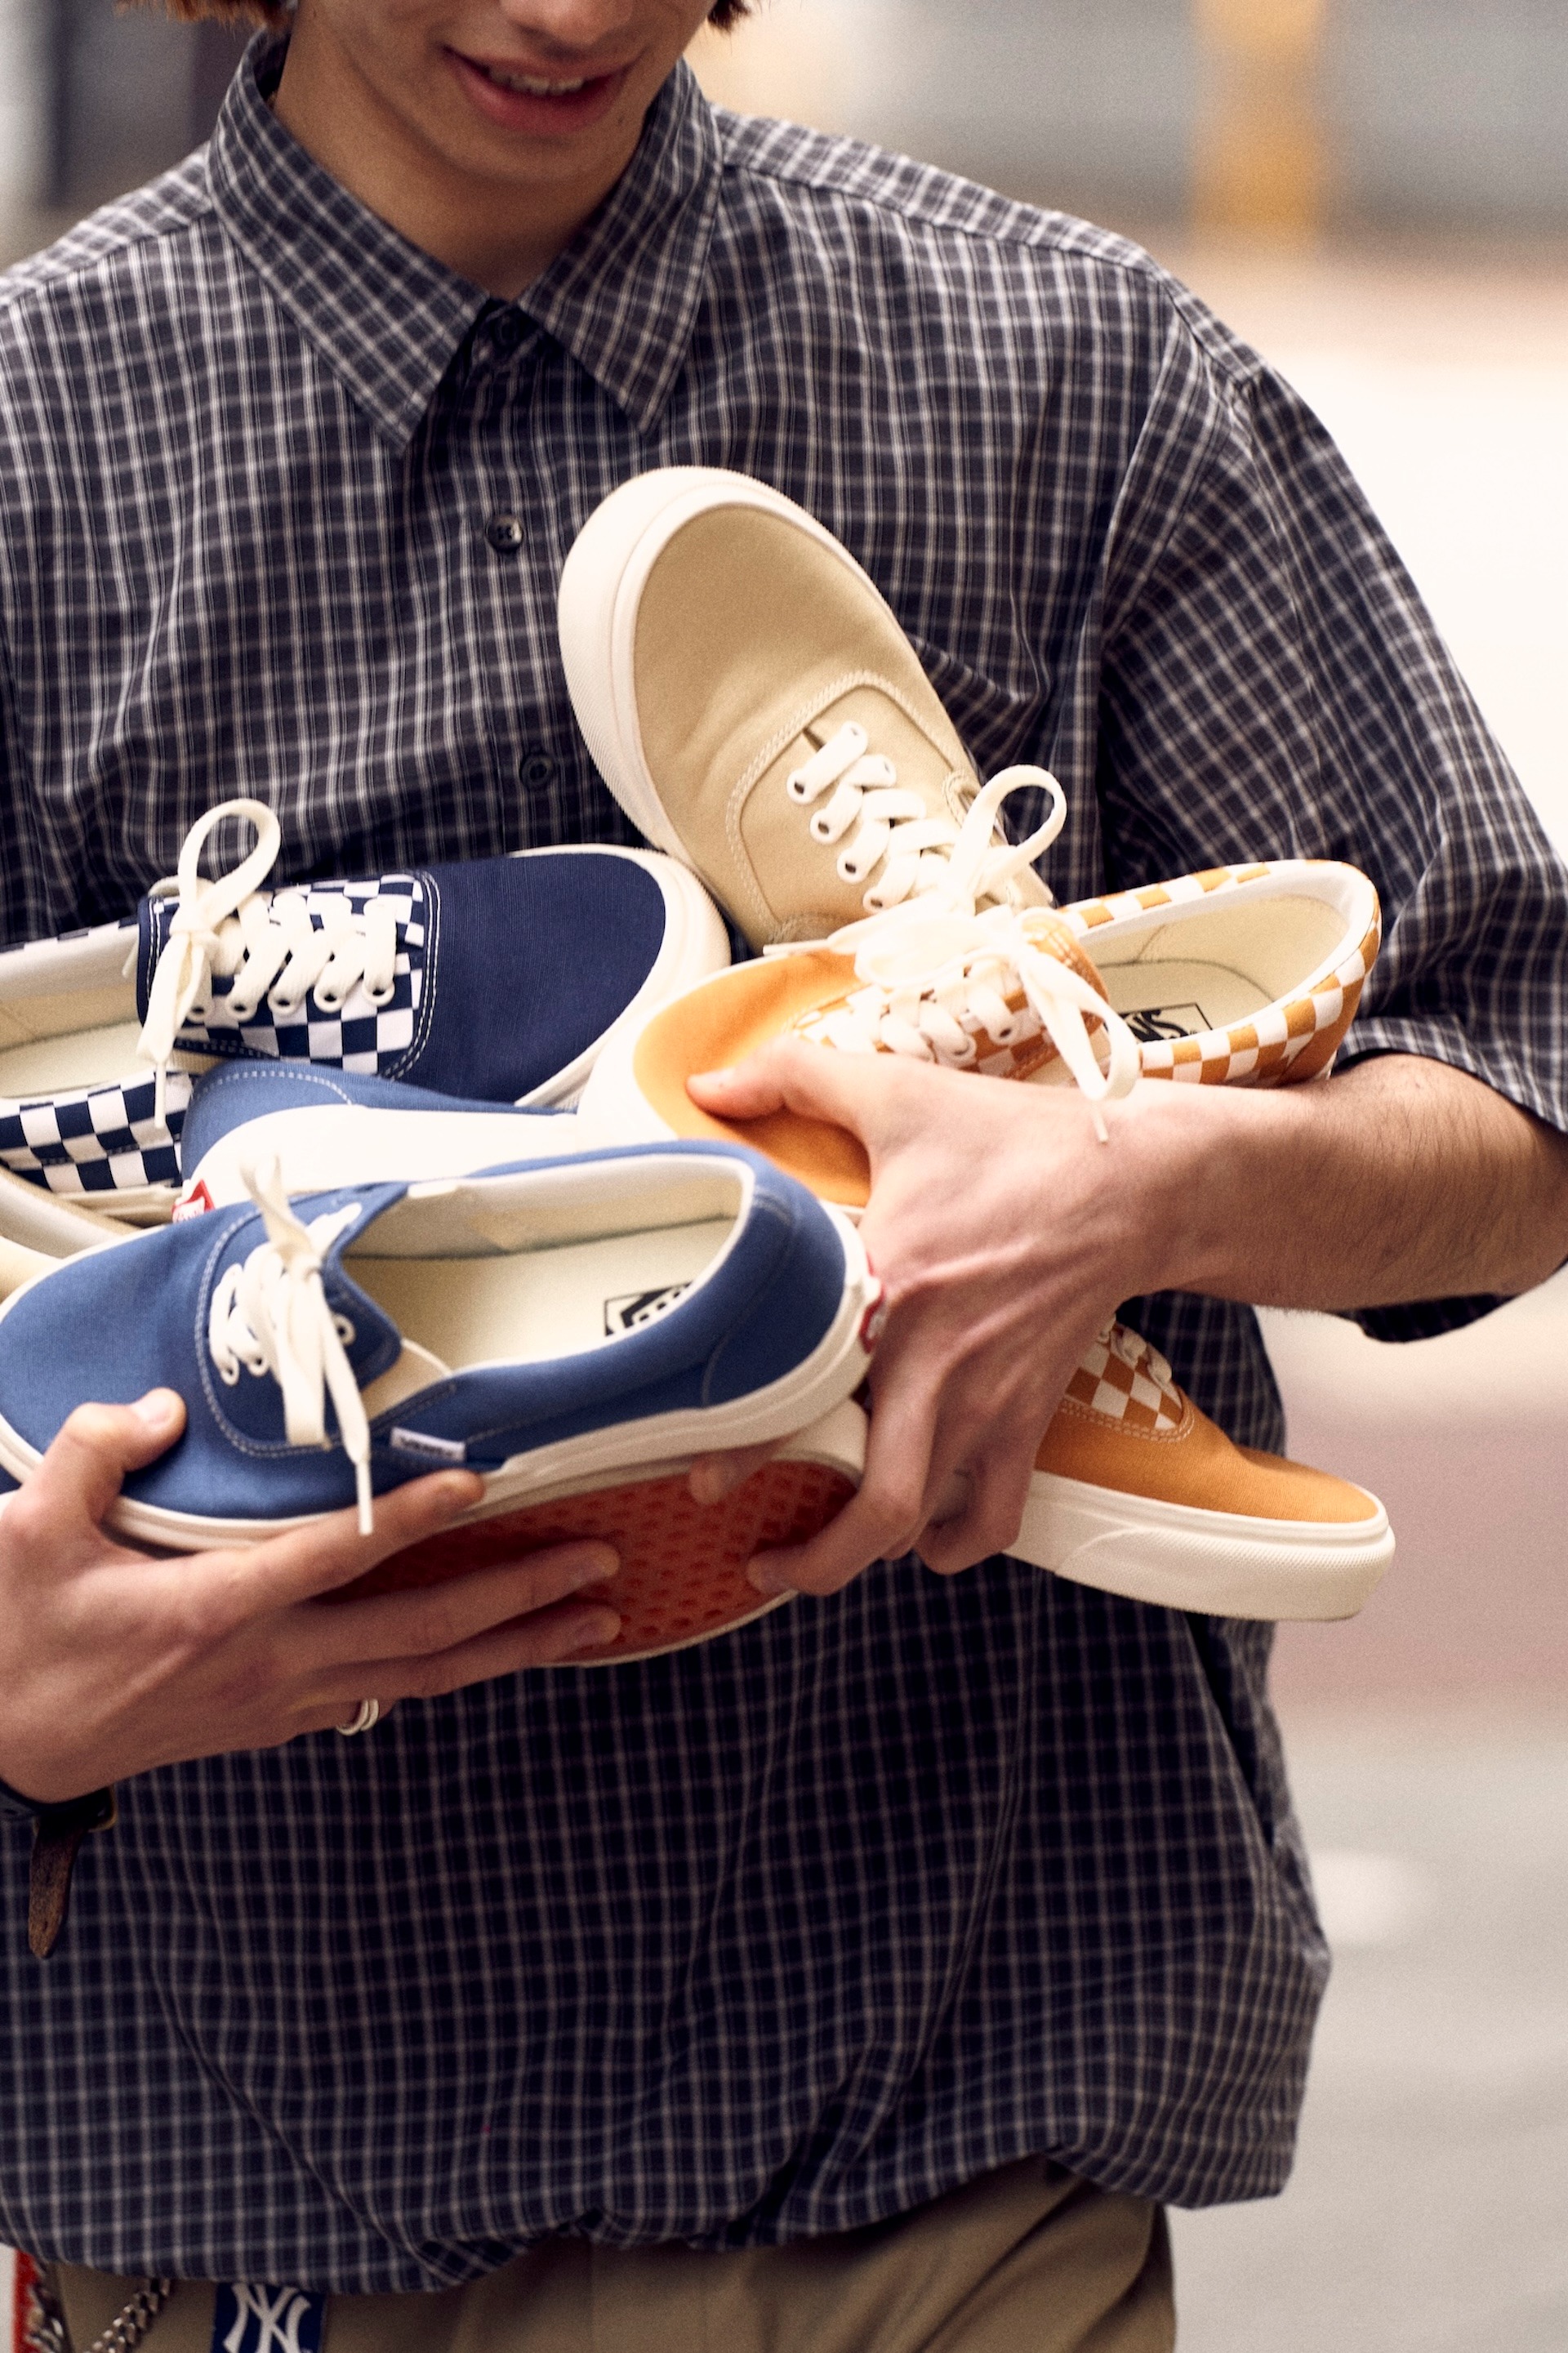 Vans' Erap sneaker that combines the Era and Slip-On sneakers in blue, black, and yellow checkerboard